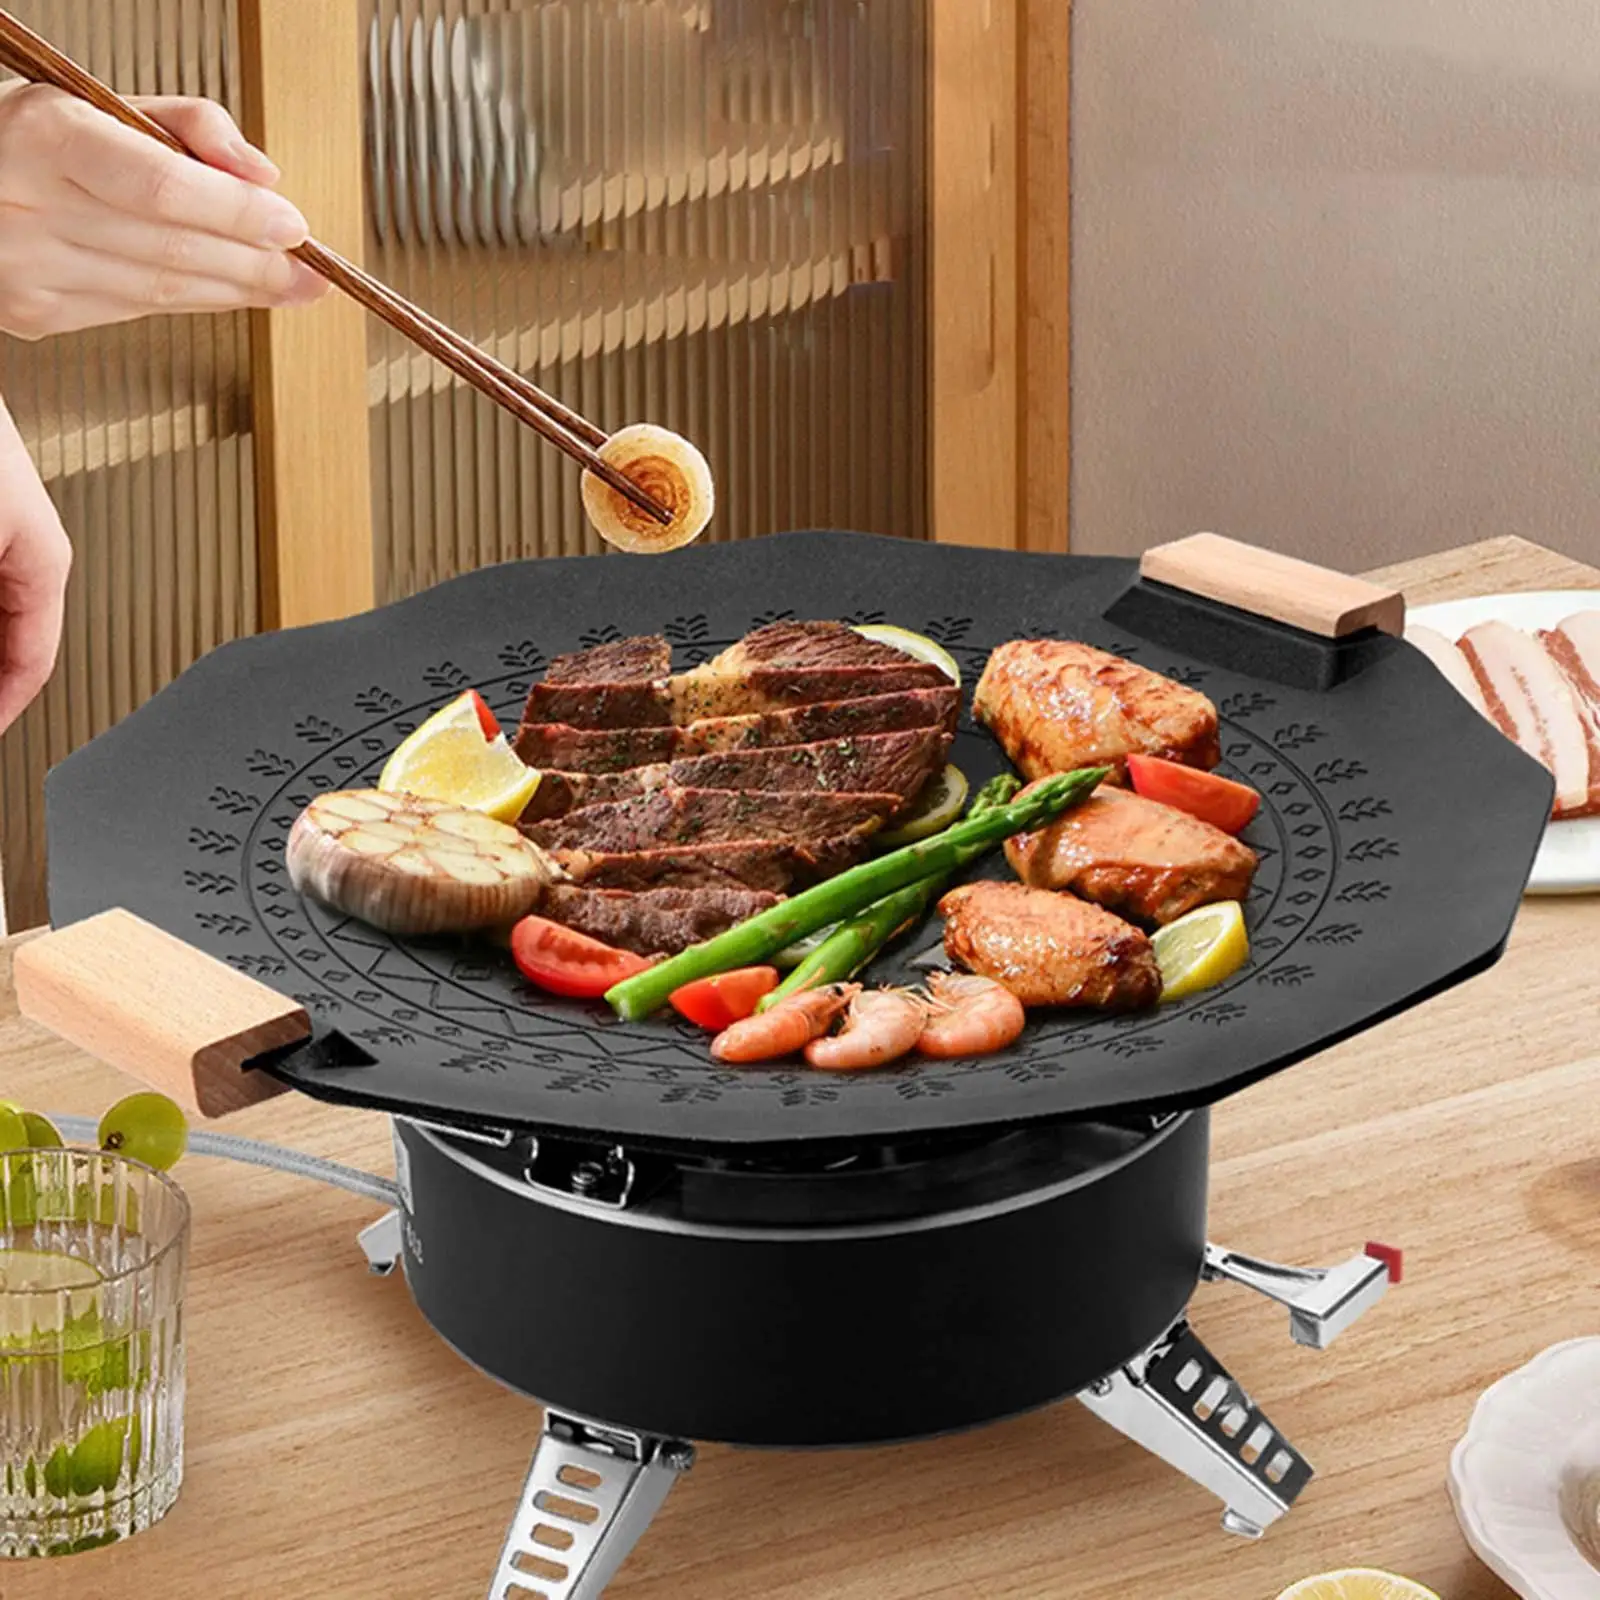 Outdoor Frying Pan 14inch Frying Plate Reusable Household BBQ Grill Tray for Frying Barbeque Baking Kitchen Cooking